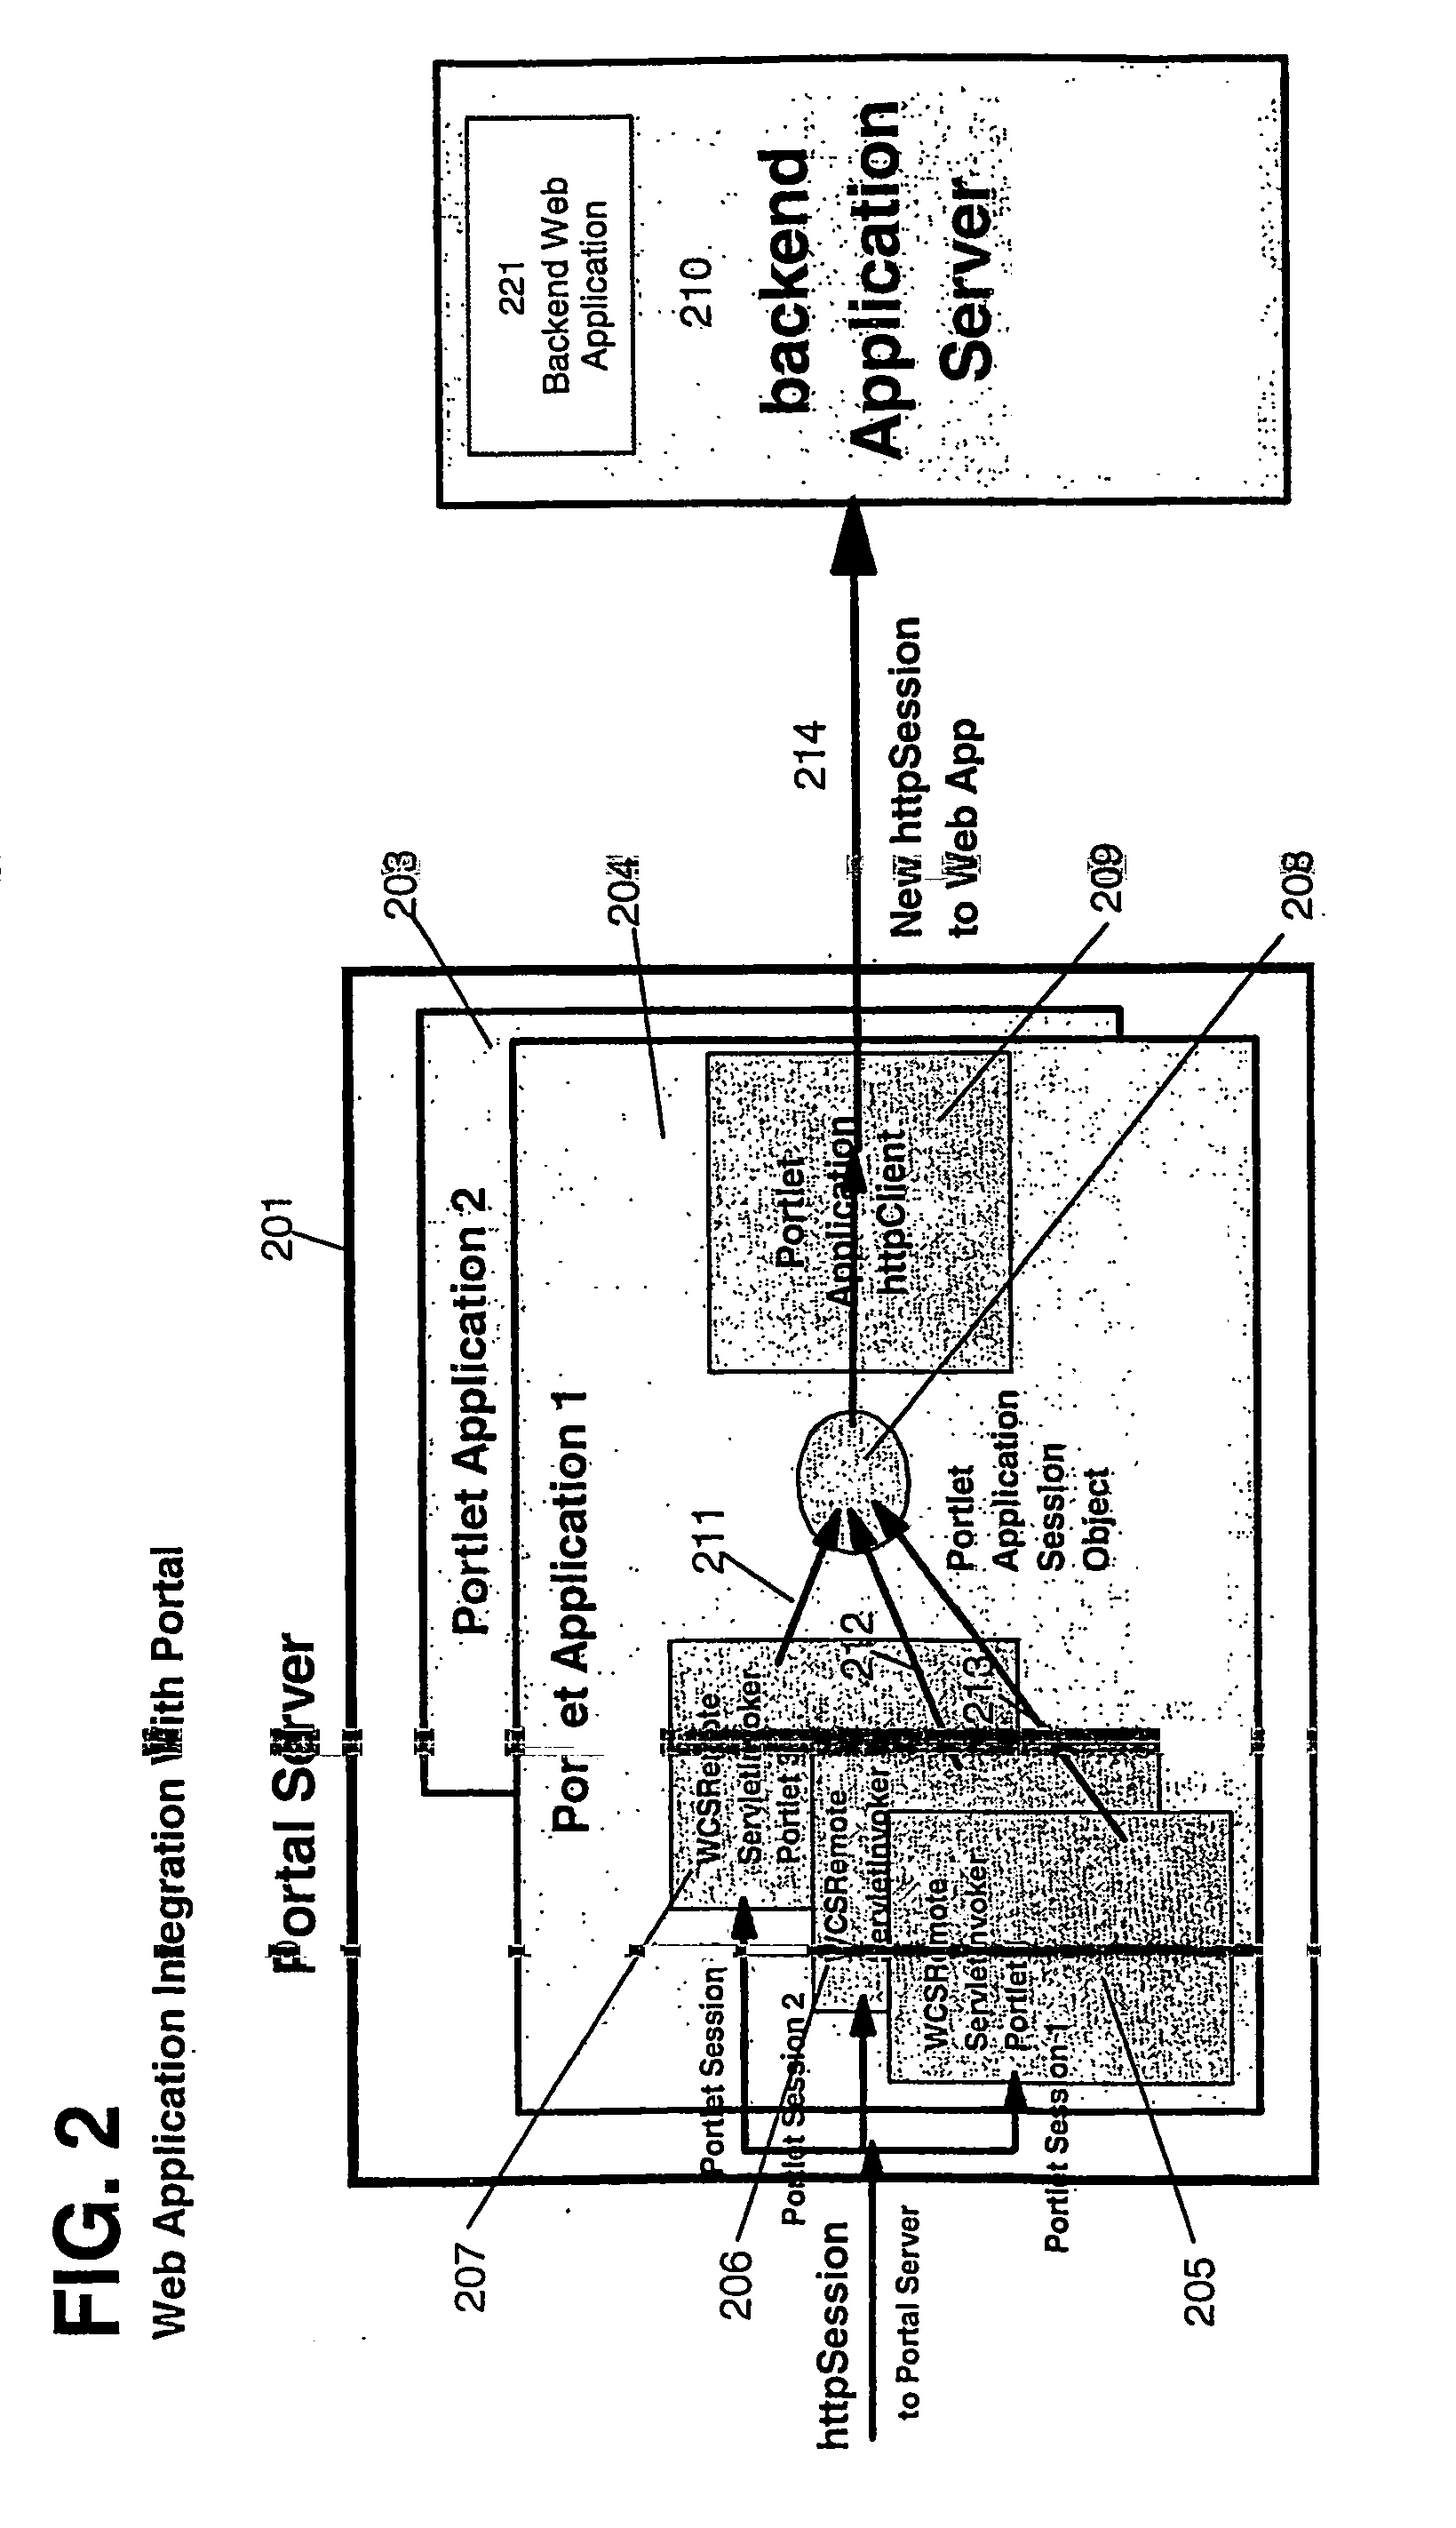 Method and apparatus for enabling associated portlets of a web portlet to collaborate for synchronized content display